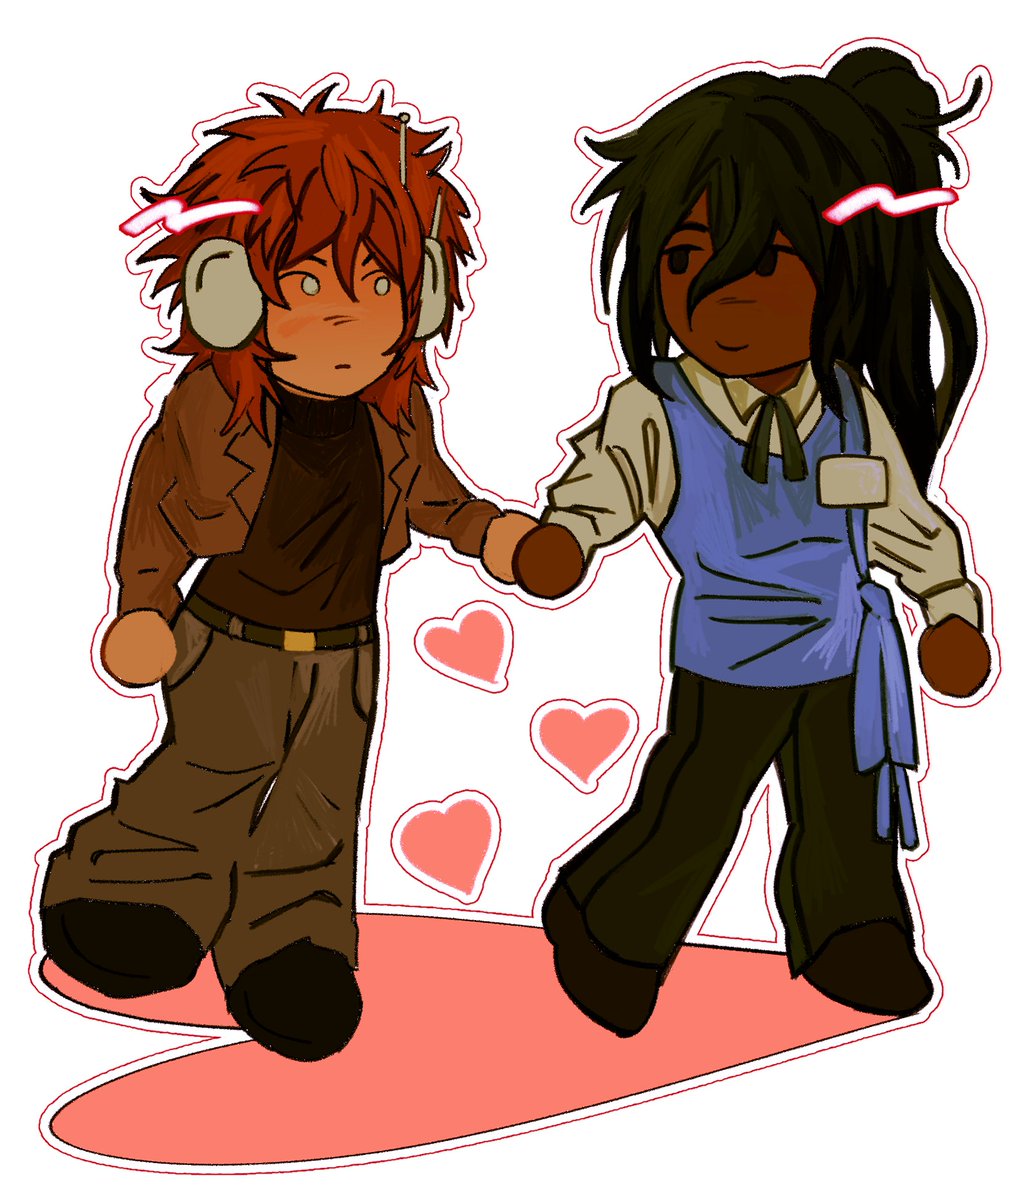 drew my bfs ocs because hes awesome